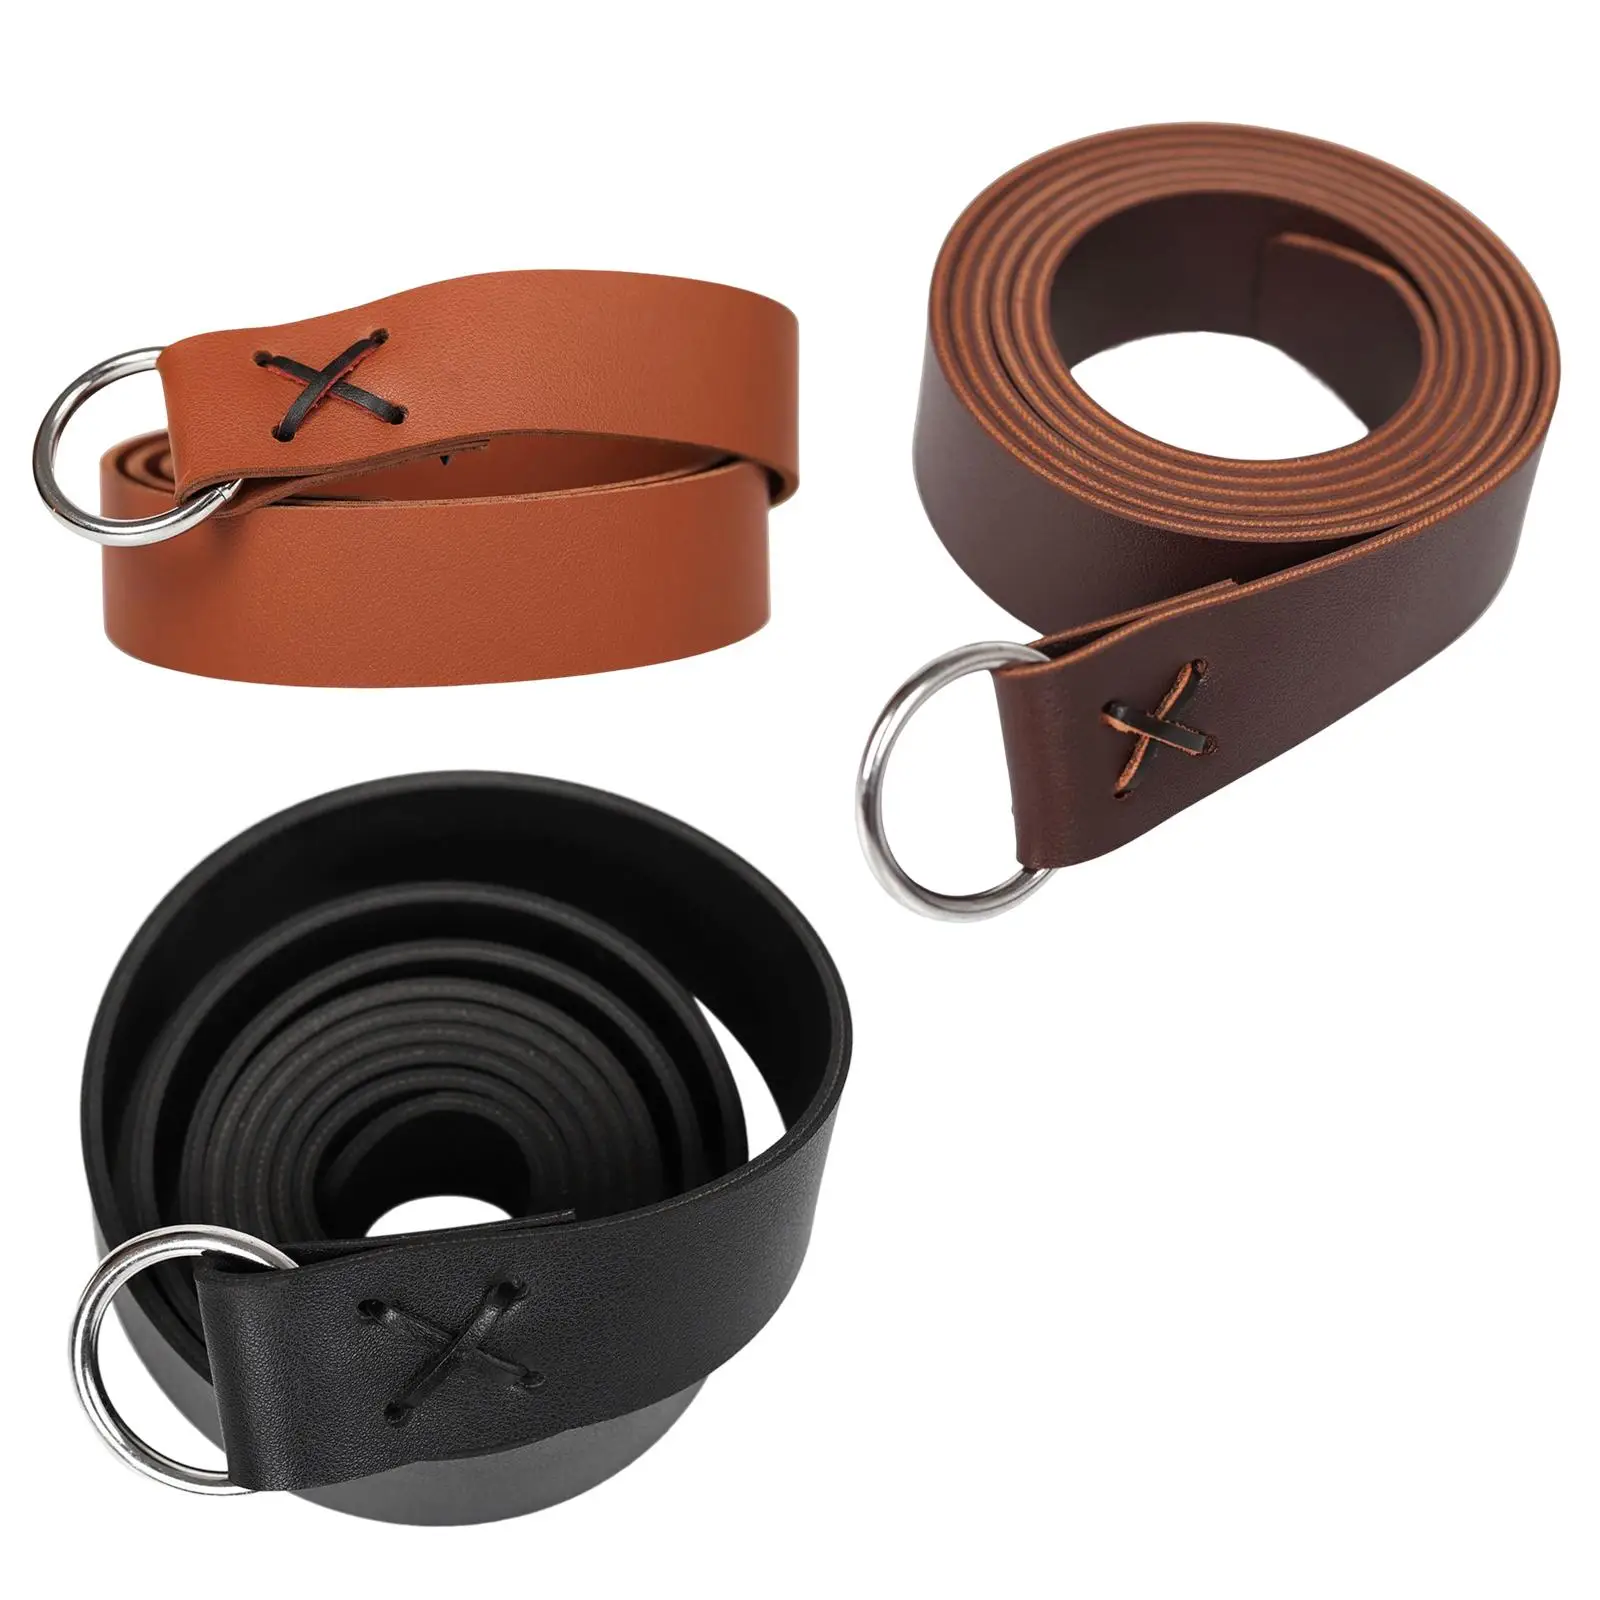 Leather Medieval Belt Costume Accessories Waistband Viking Belt for Halloween Stage Performances Medieval Events Decoration